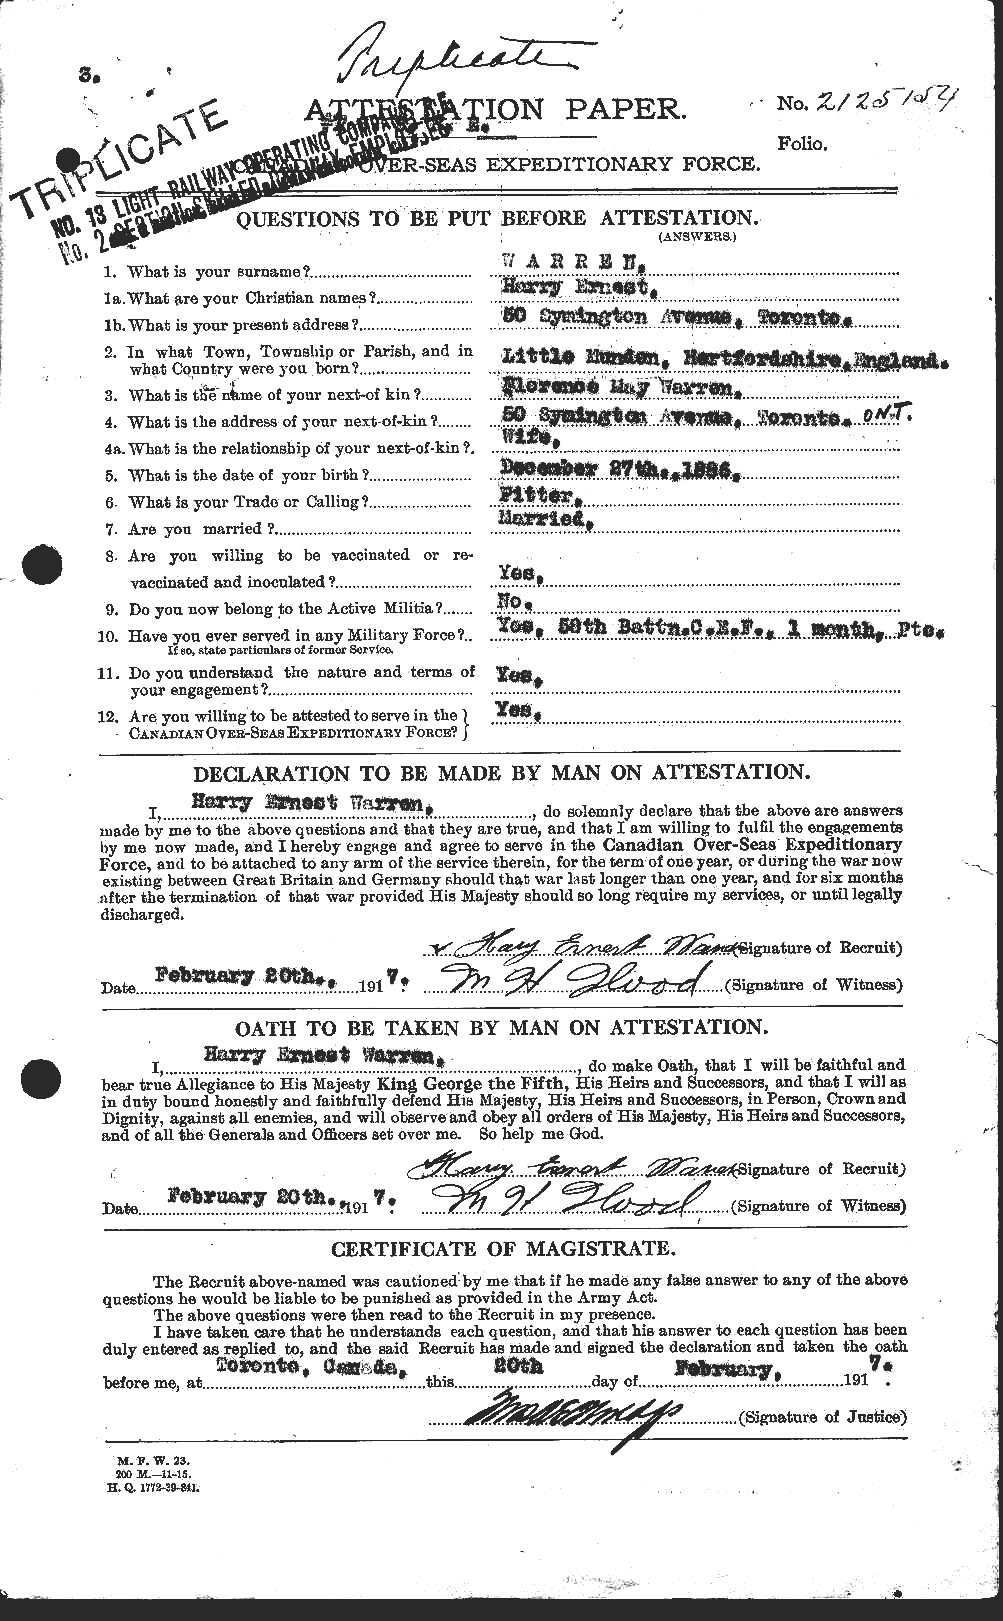 Personnel Records of the First World War - CEF 658486a